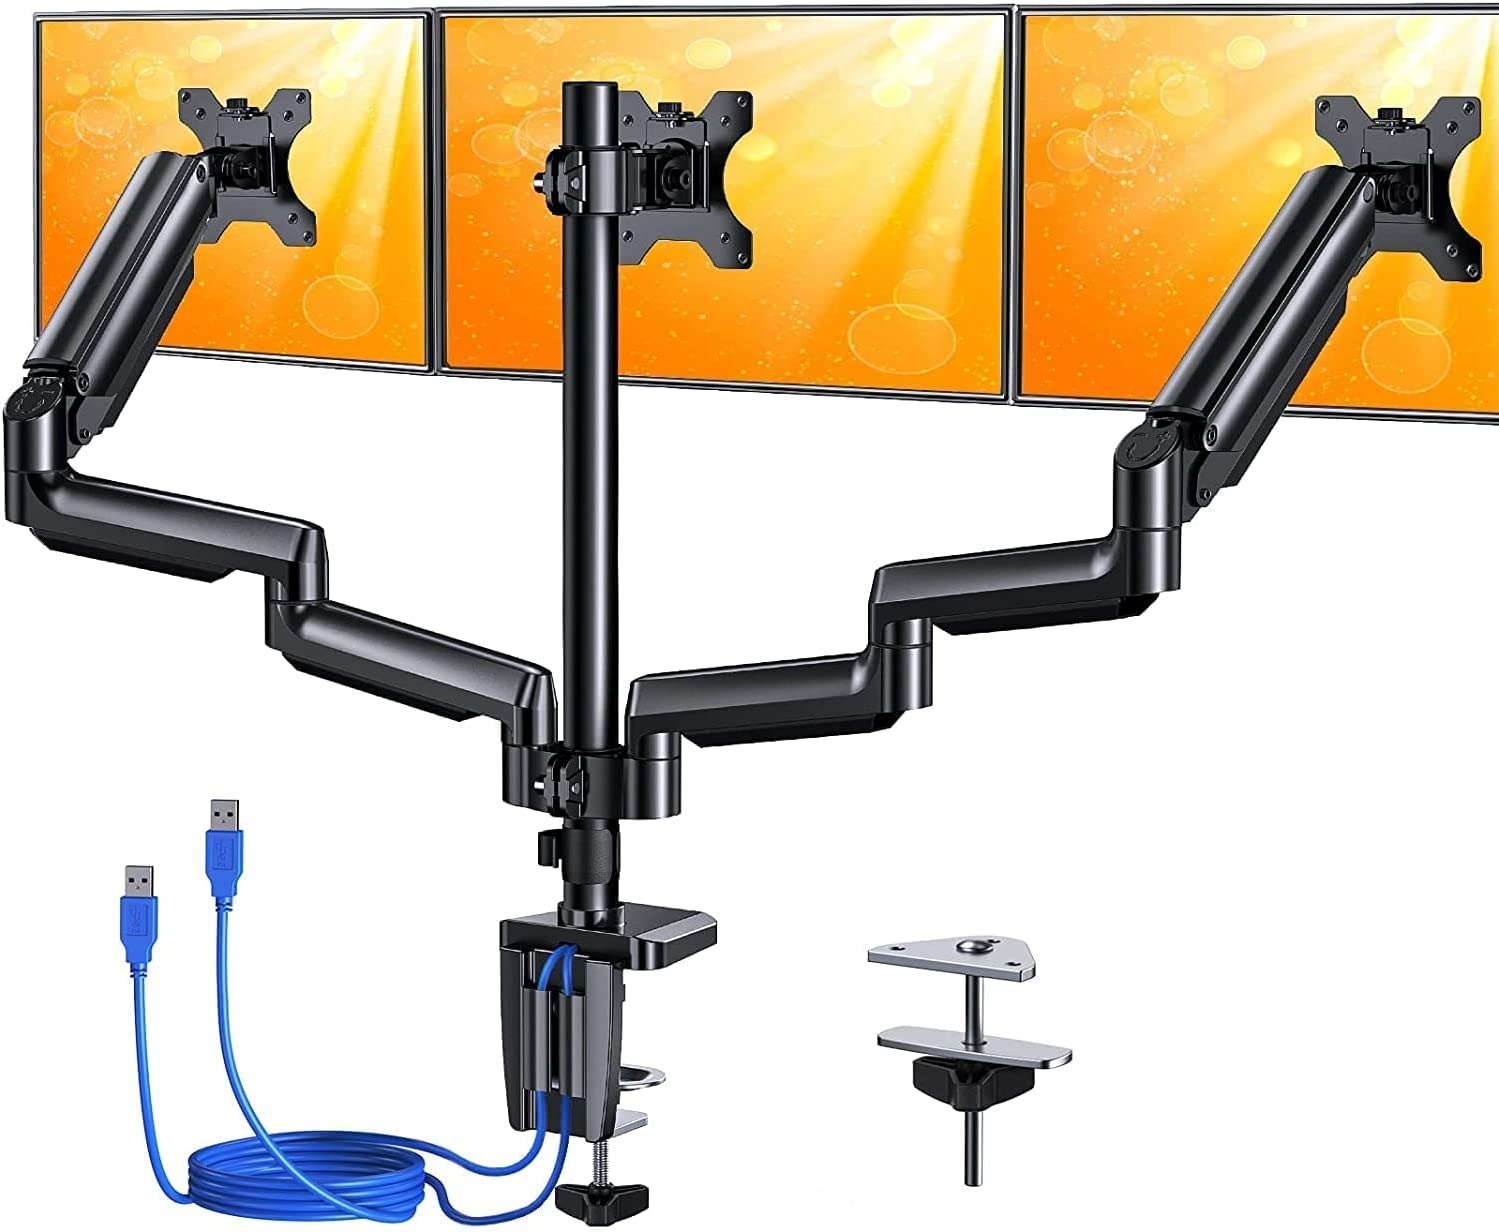 ErGear Dual-Gas Spring Arm Triple Monitor Stand Mount (Up to 27") $65 + Free Shipping